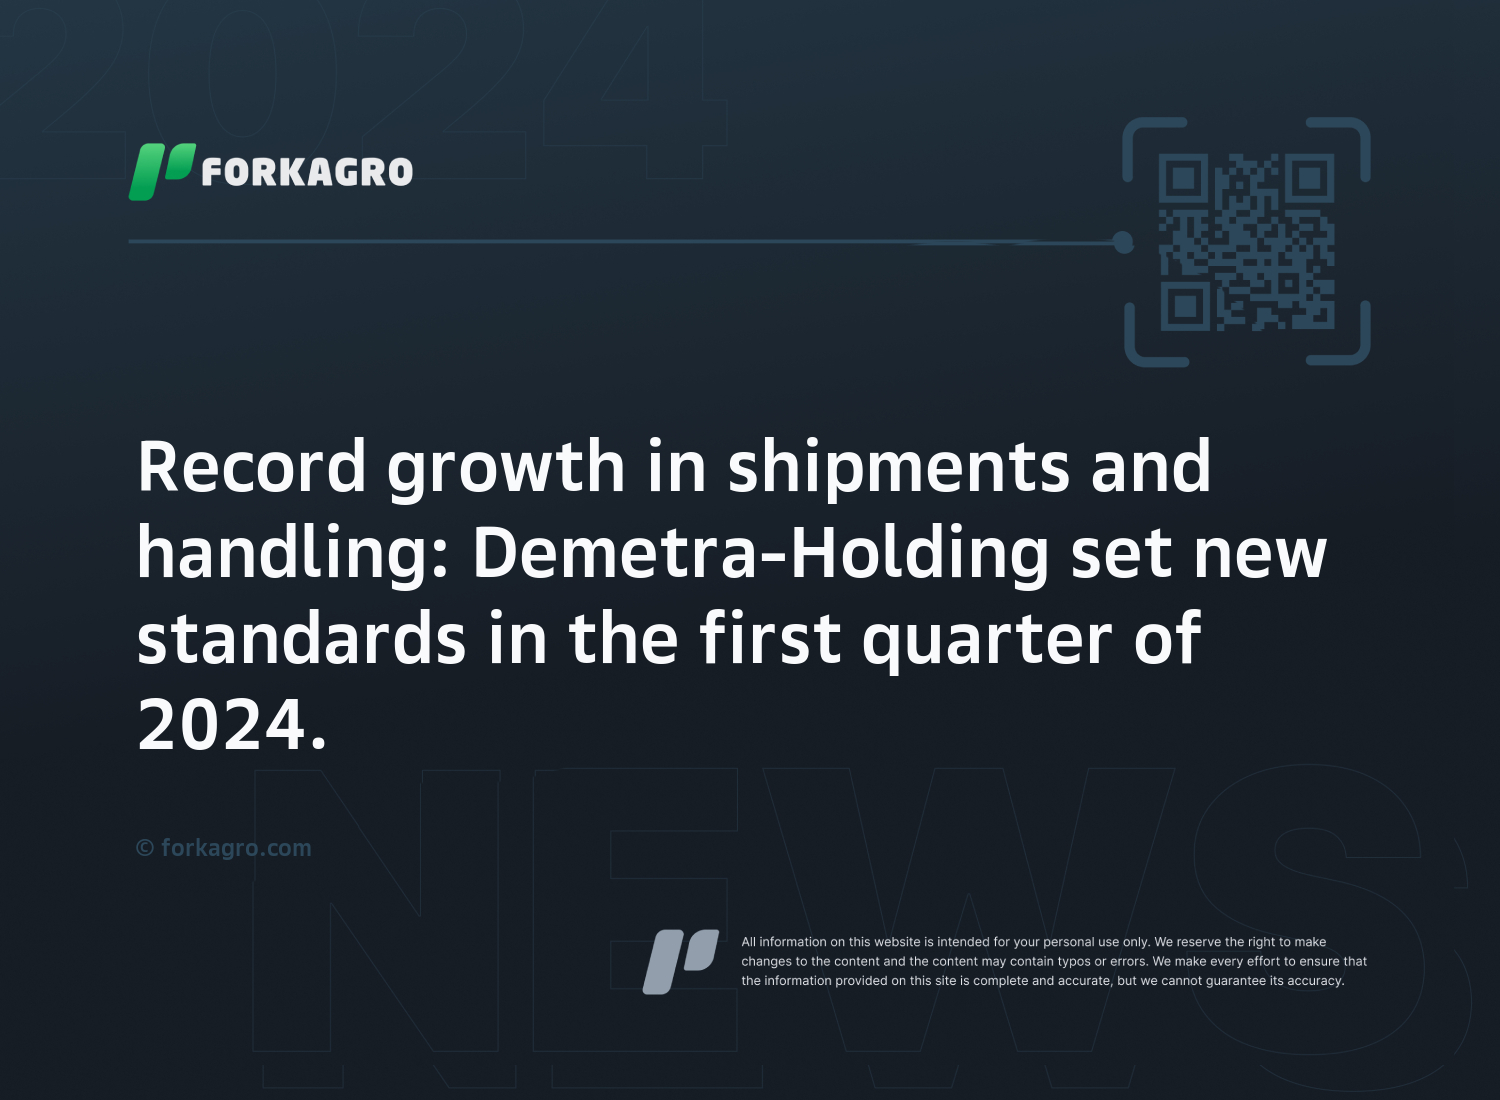 Record growth in shipments and handling: Demetra-Holding set new standards in the first quarter of 2024.